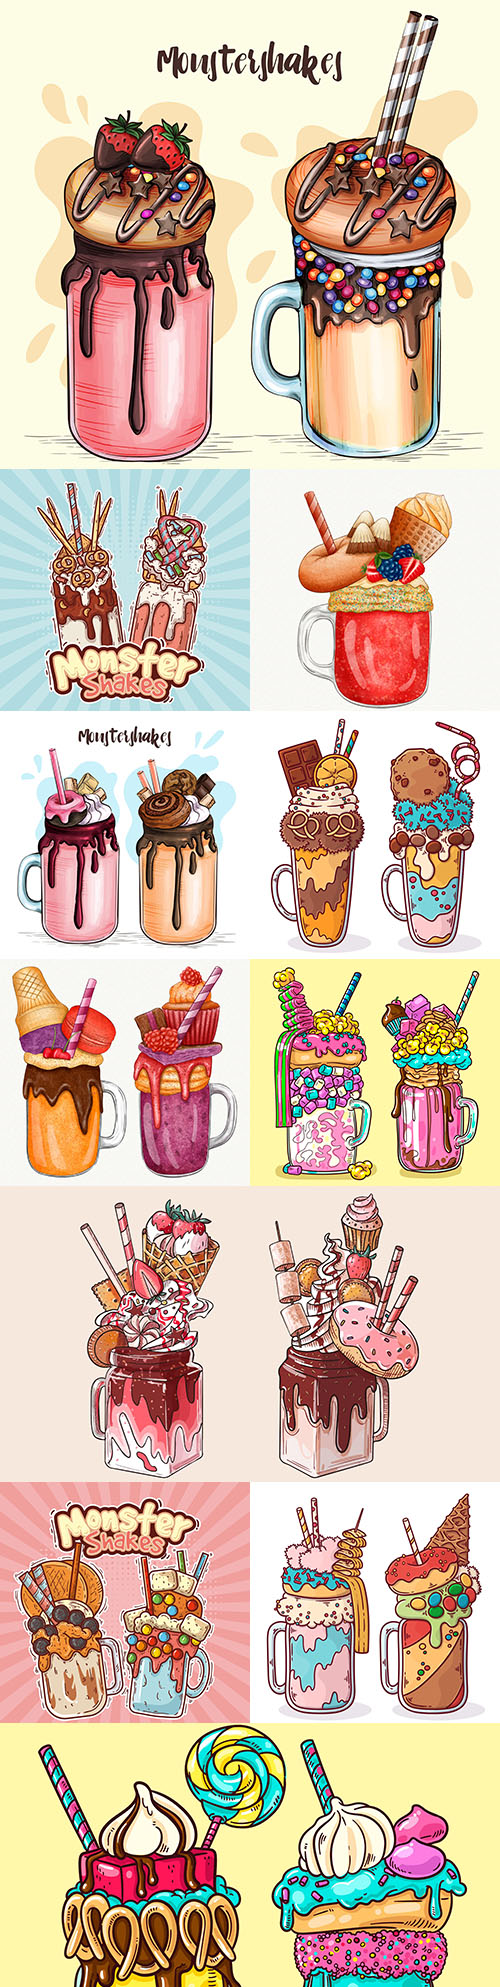 Tasty ice cream and monster shakes illustrations
